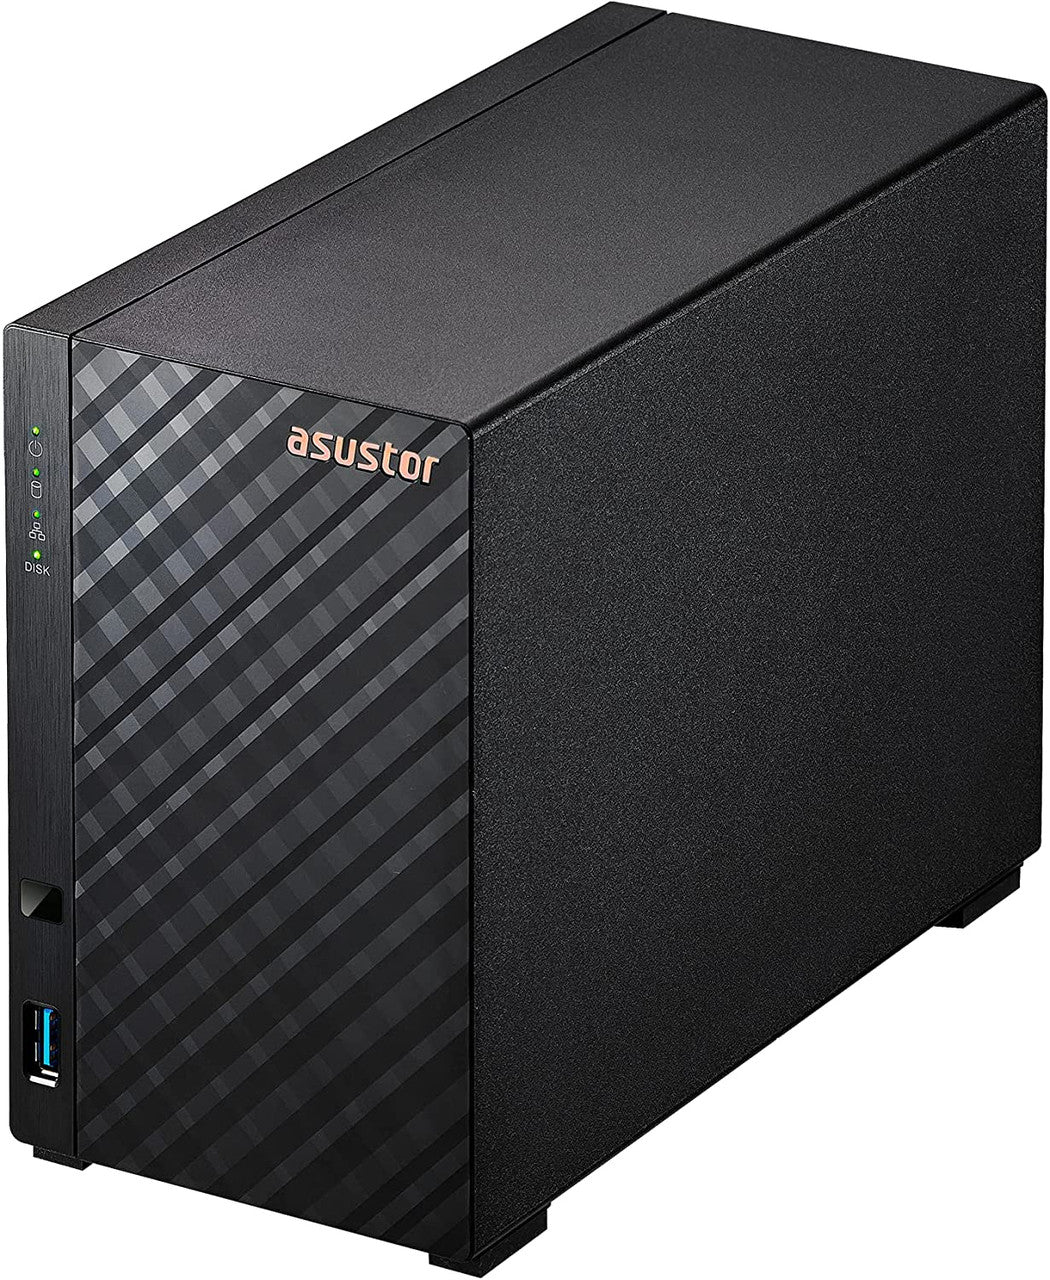 Asustor AS1102T 2-Bay Drivestor 2 NAS with 1GB RAM and 4TB (2x2TB) Western Digital RED Plus Drives